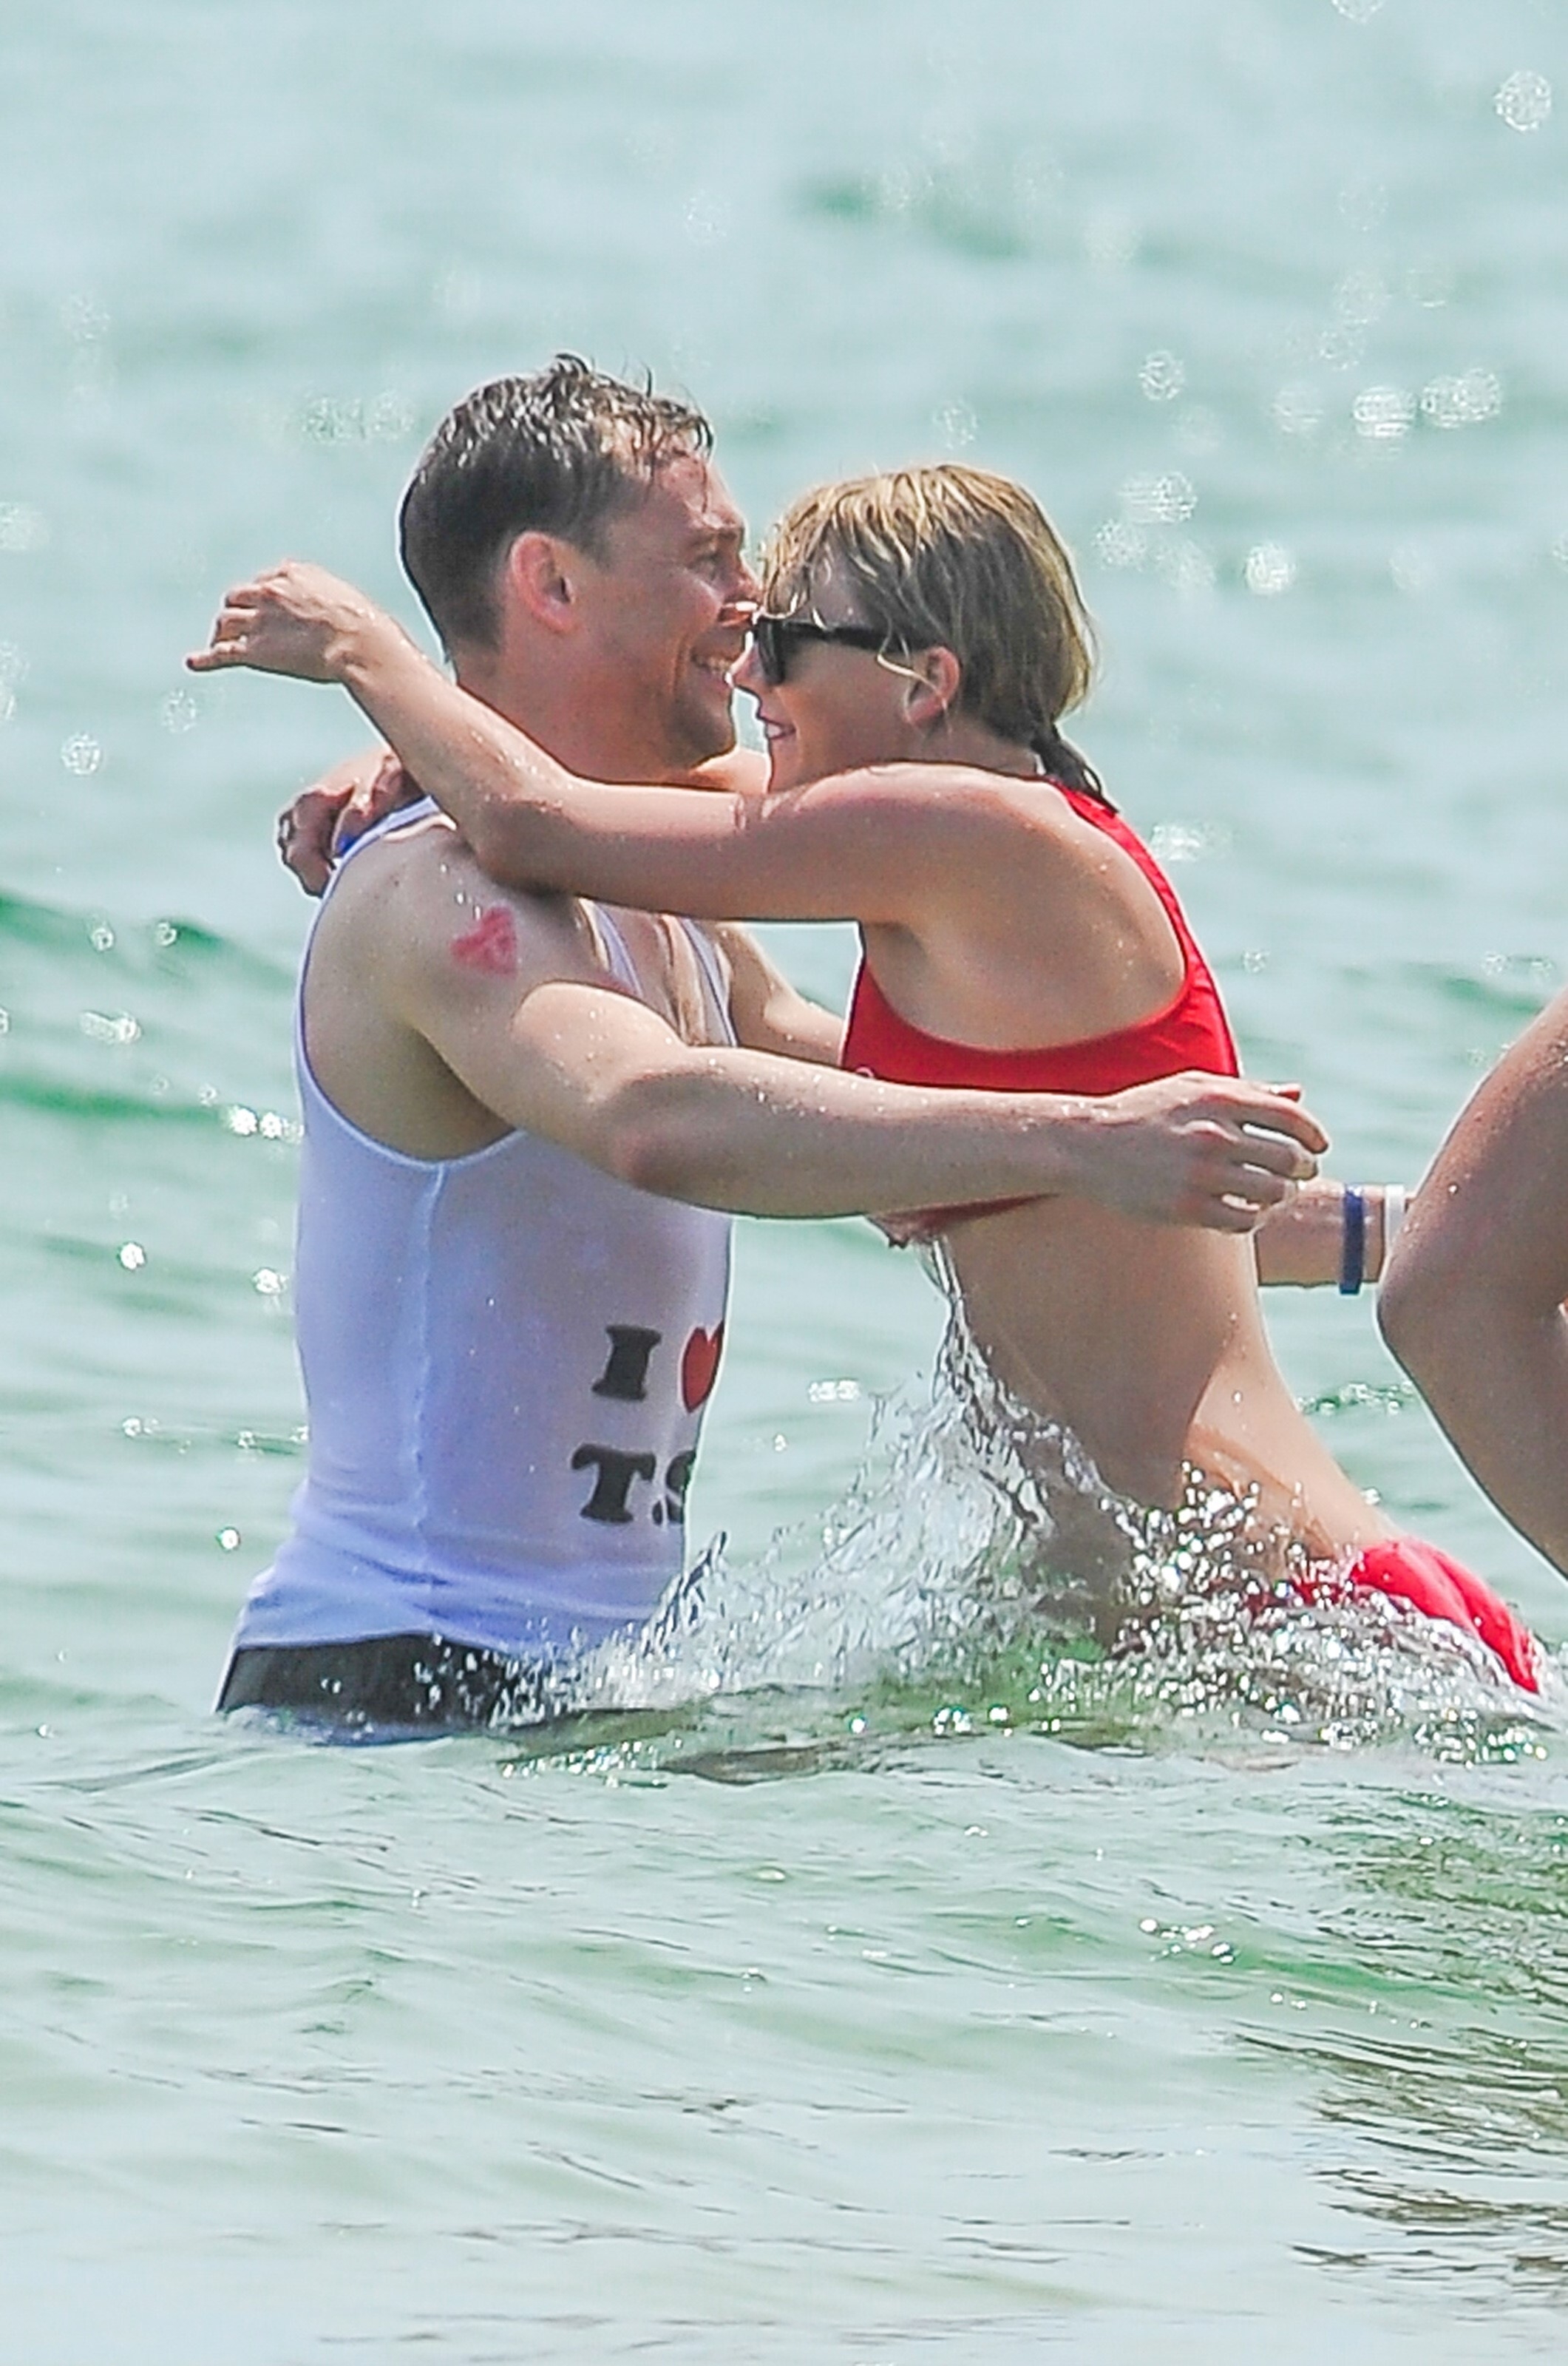 Taylor Swift and Tom Hiddleston at the beach